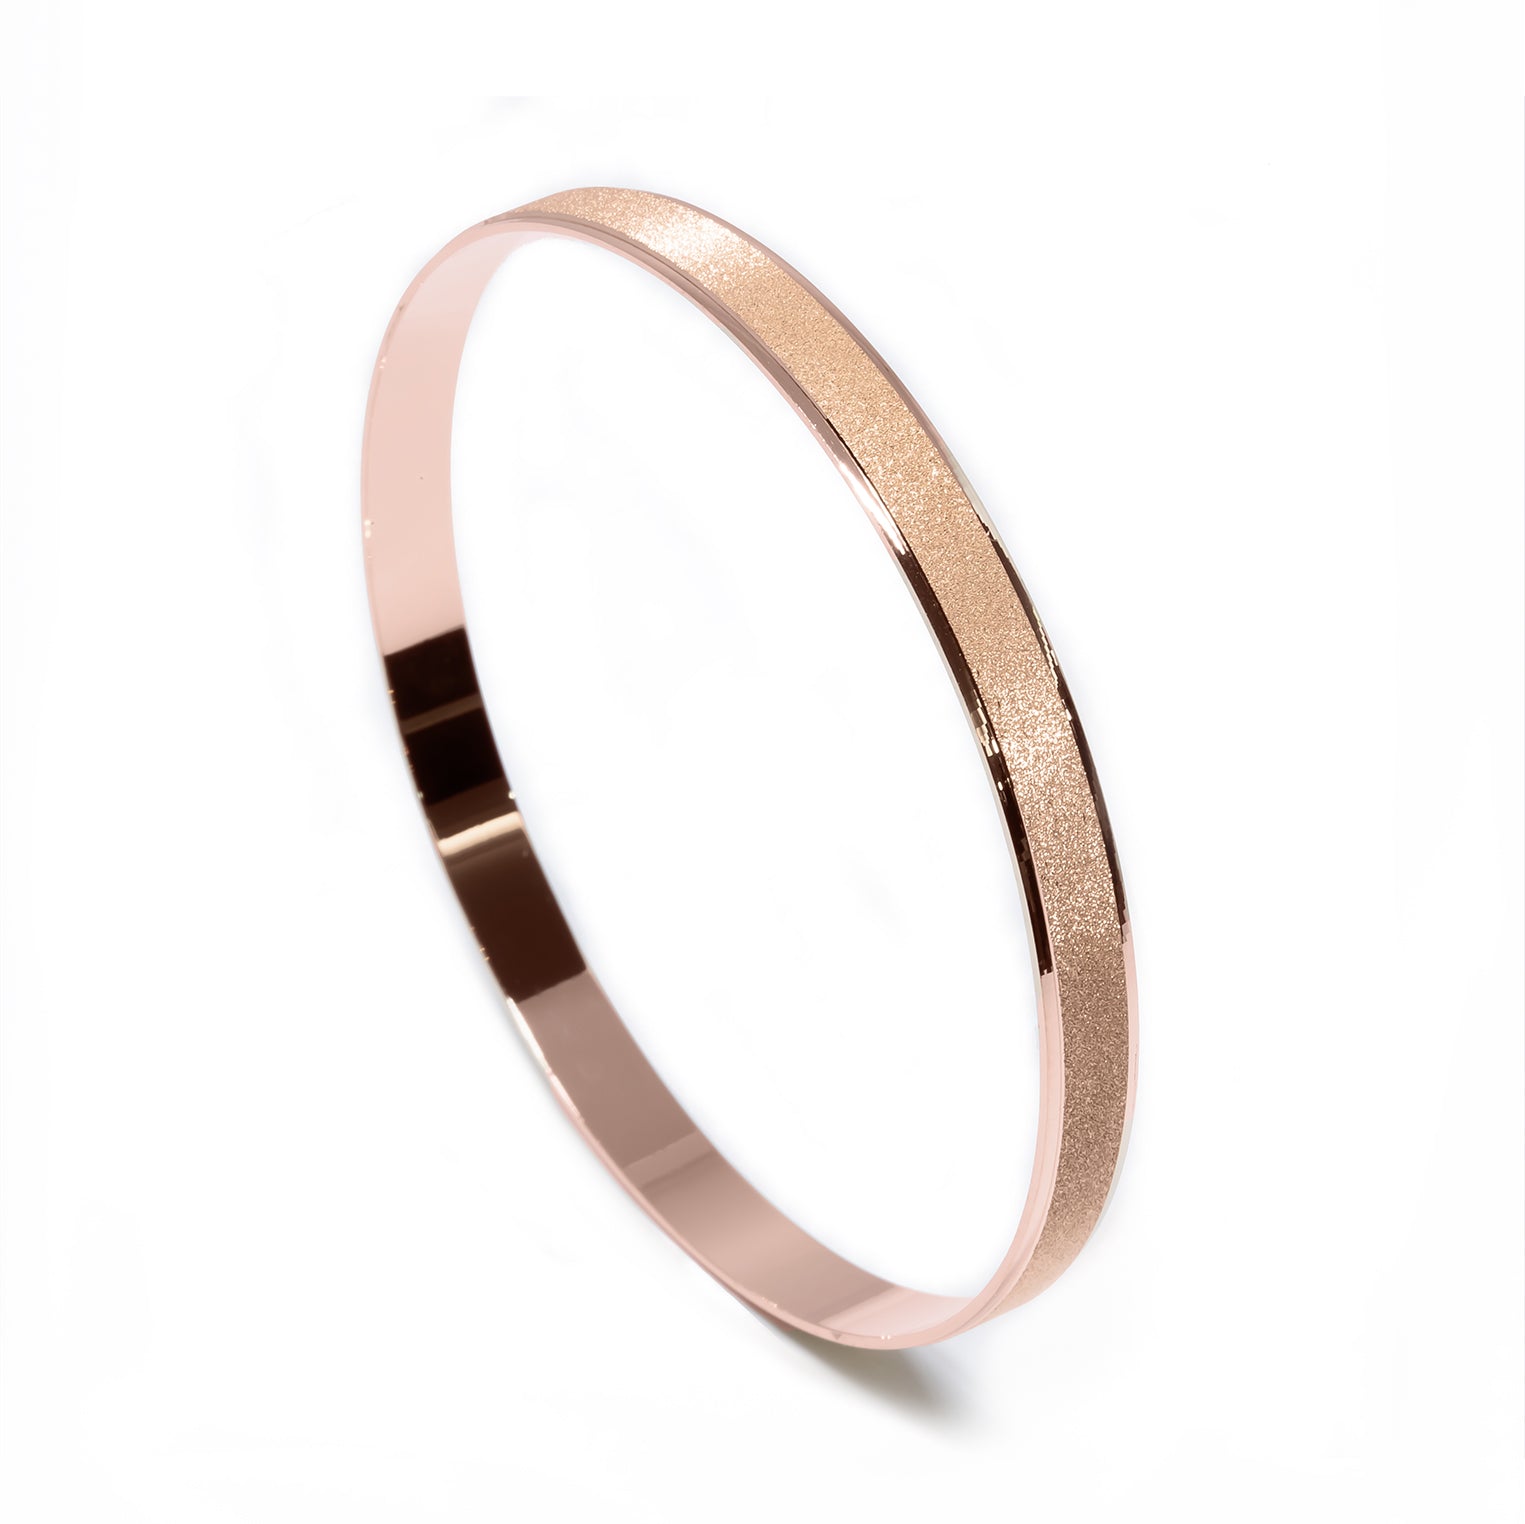 Bangle EARTH IS ROUND 6mm sand finishing red gold 18k 750